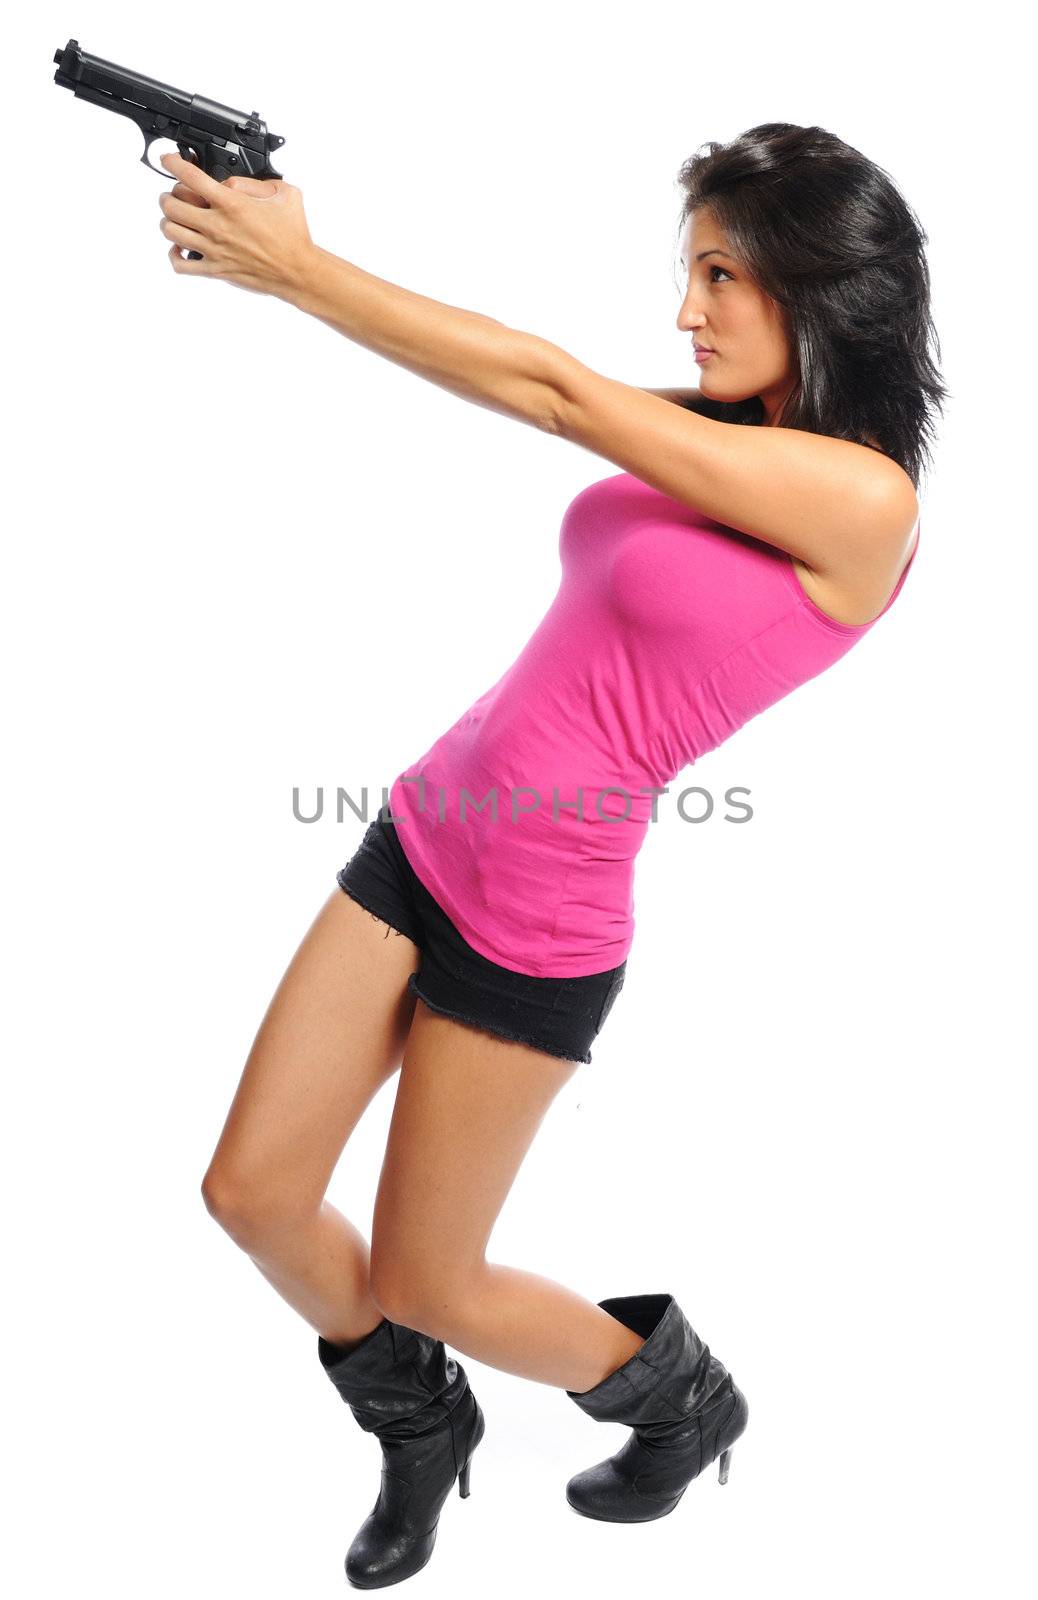 Woman and a pistol by PDImages